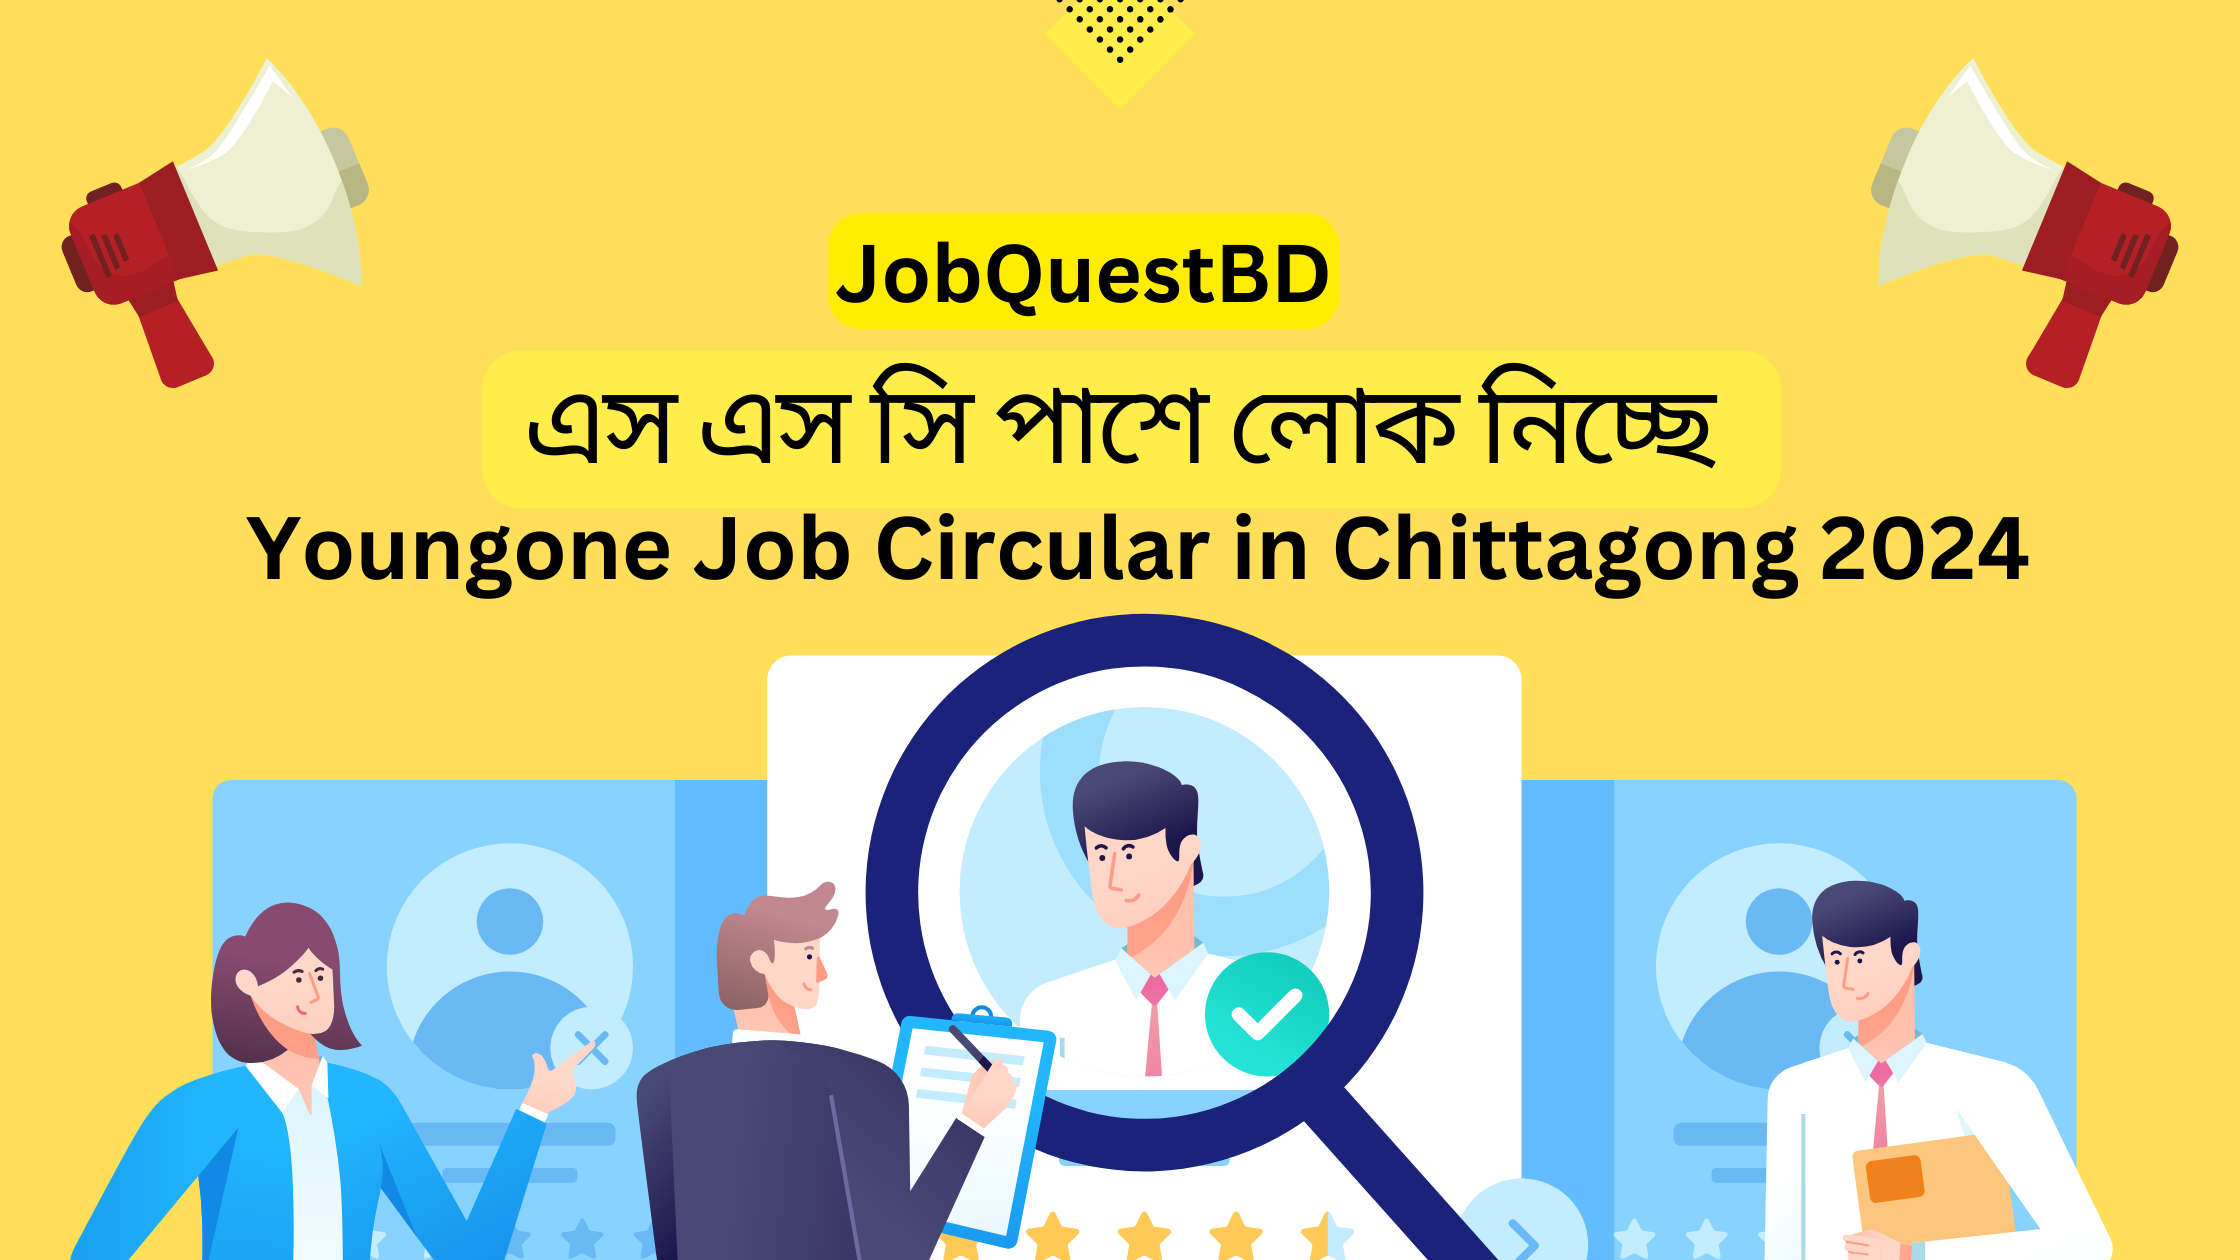 Youngone Job Circular in Chittagong 2024